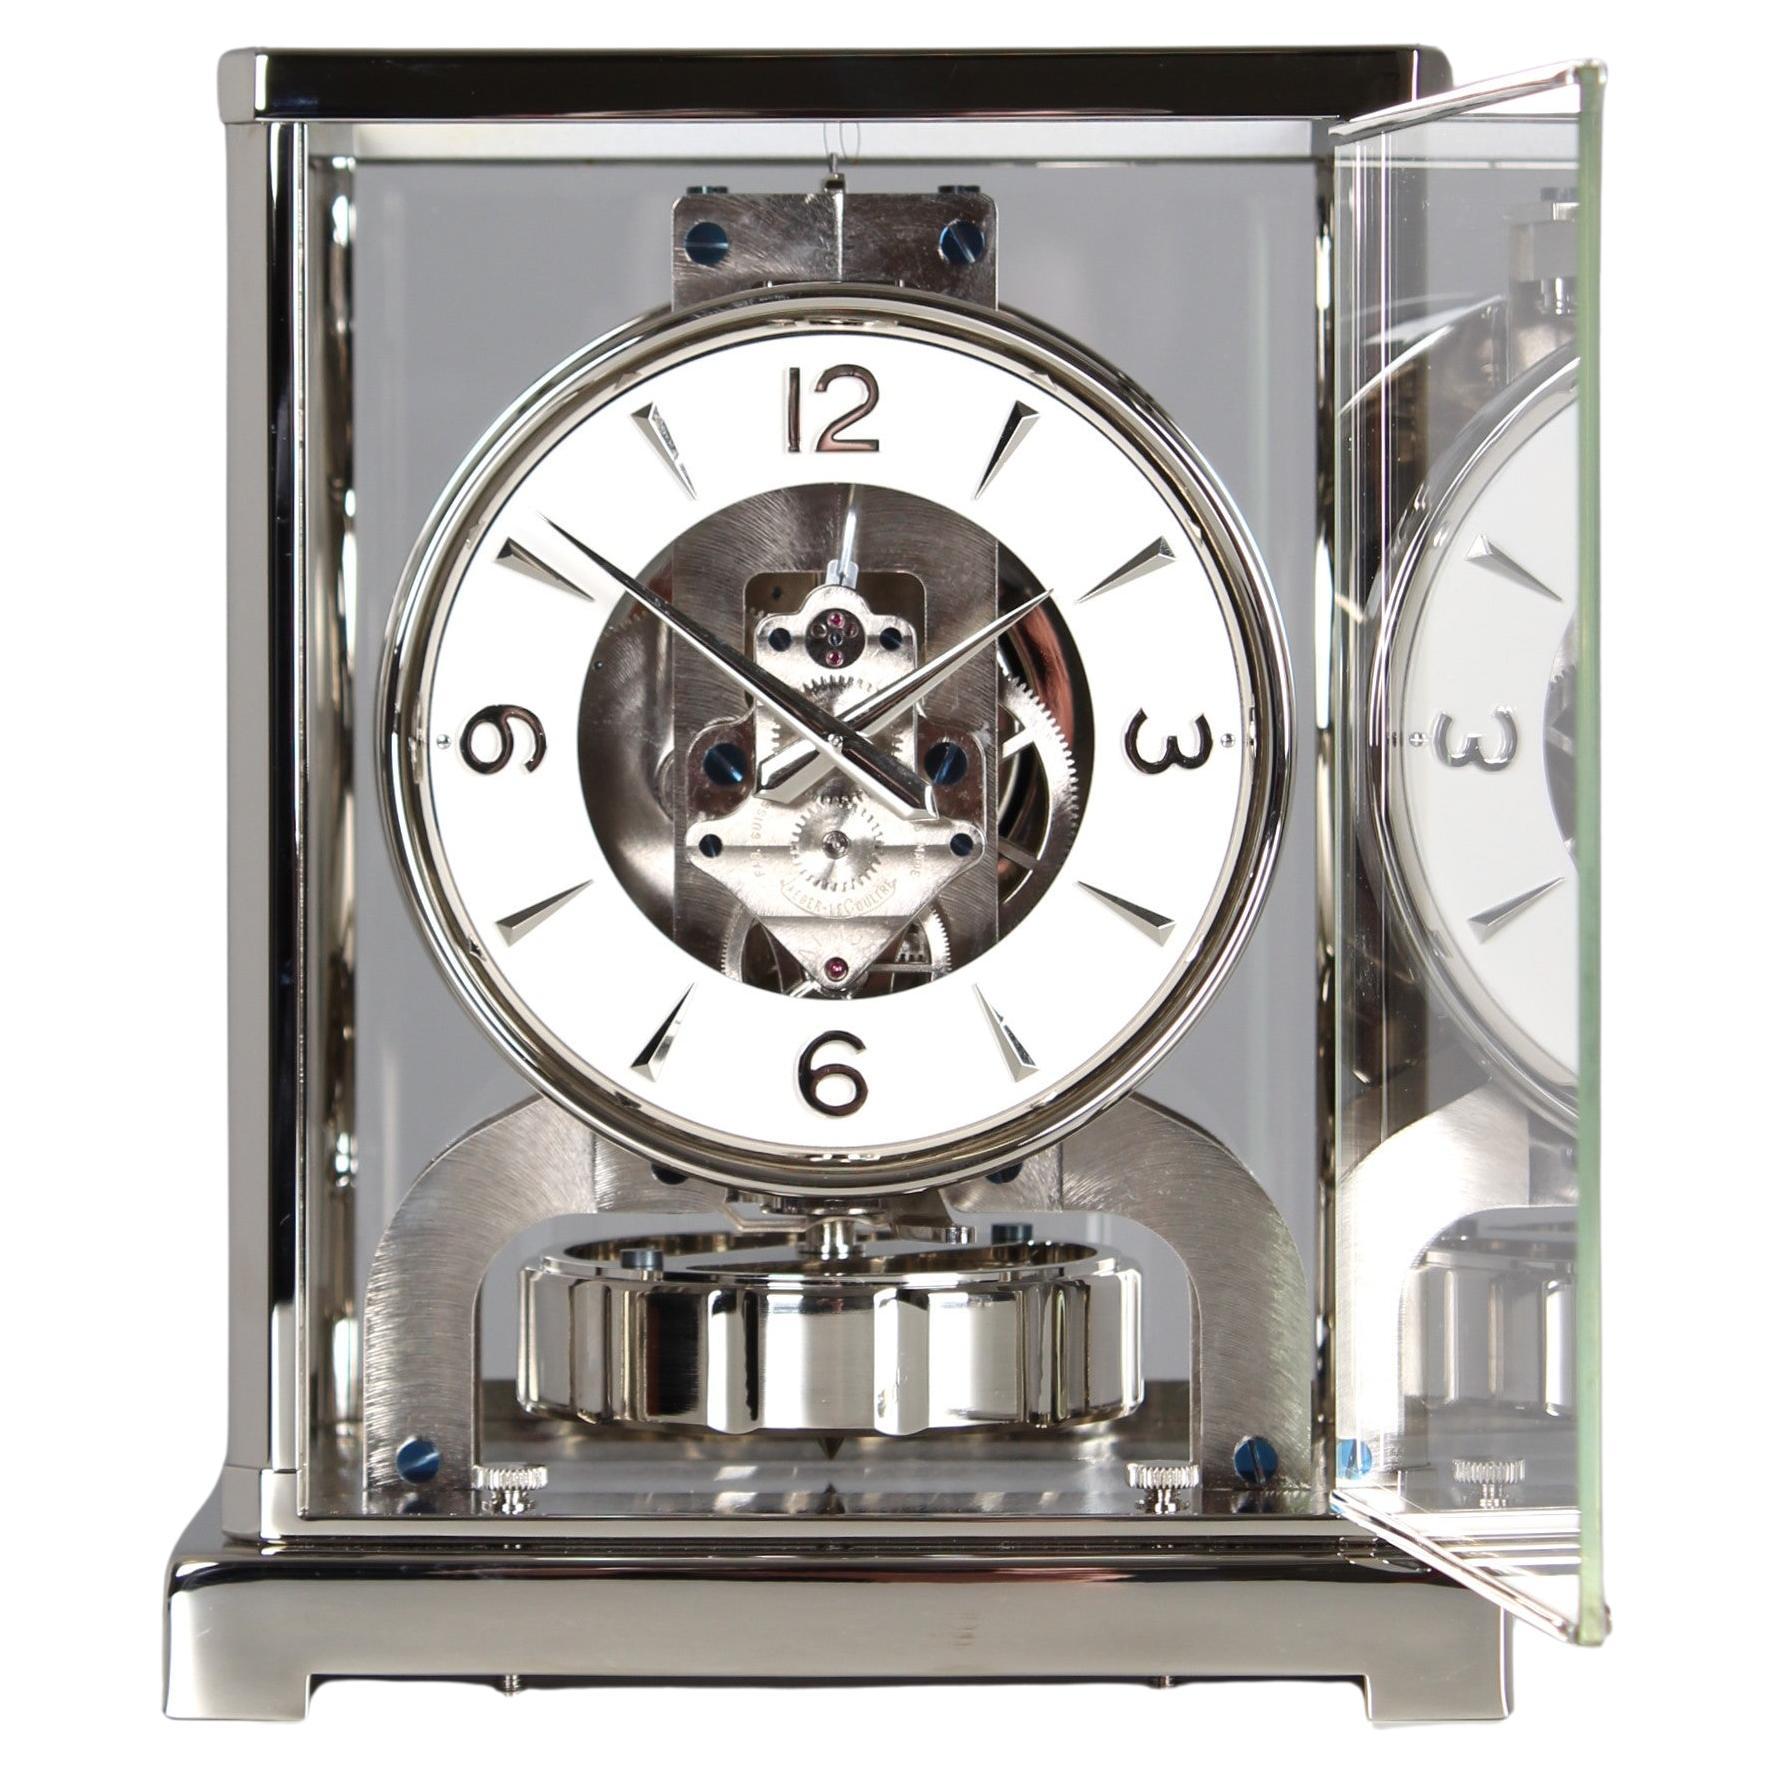 Jaeger LeCoultre, Silver Atmos Clock from 1955, Revised and New Nickel-Plated For Sale